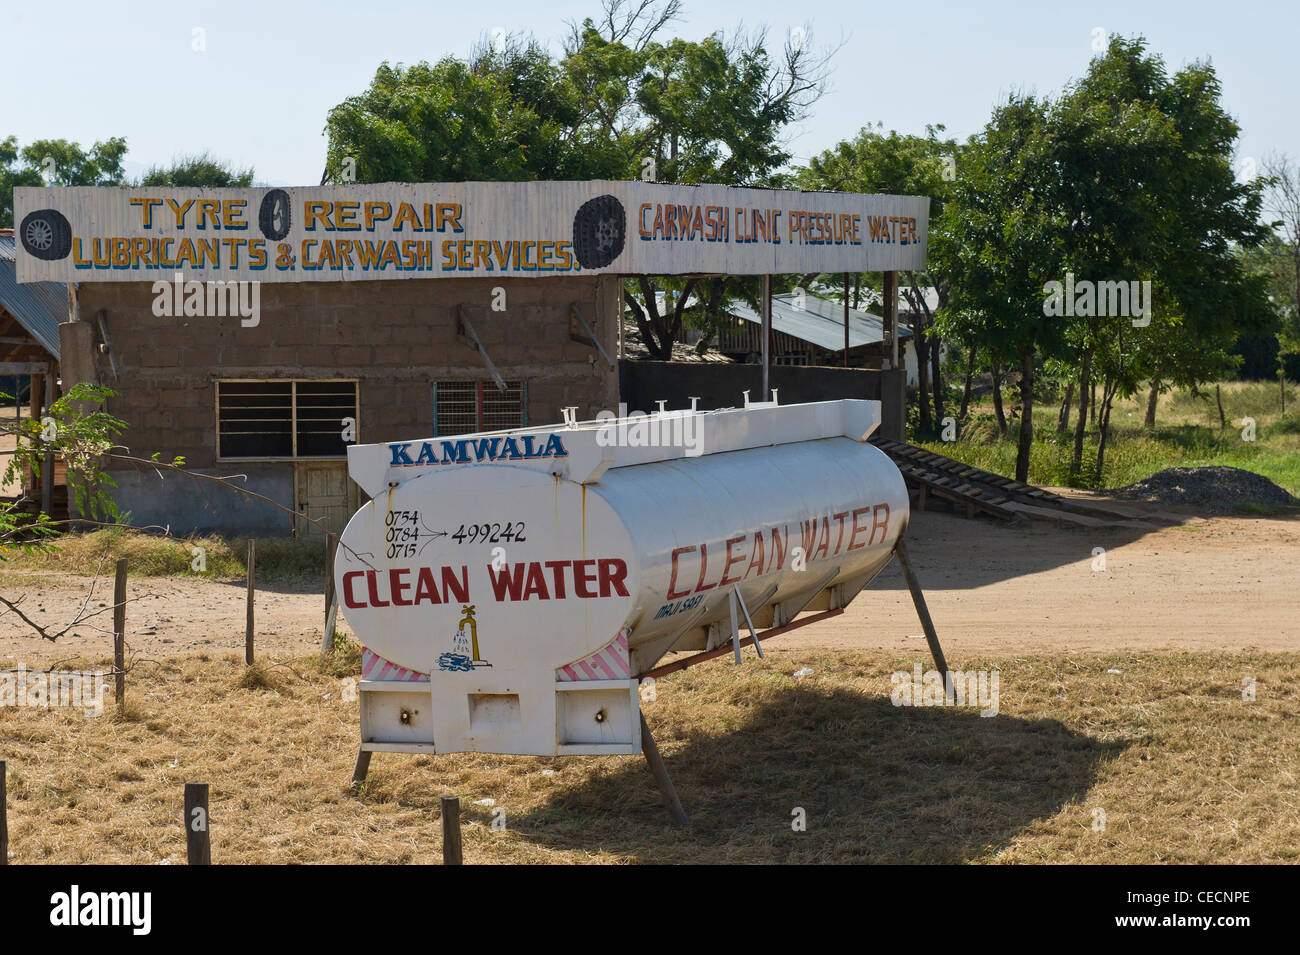 Old fuel tanker used to advertise the delivery of clean drinking water in Korogwe Tanzania Stock Photo